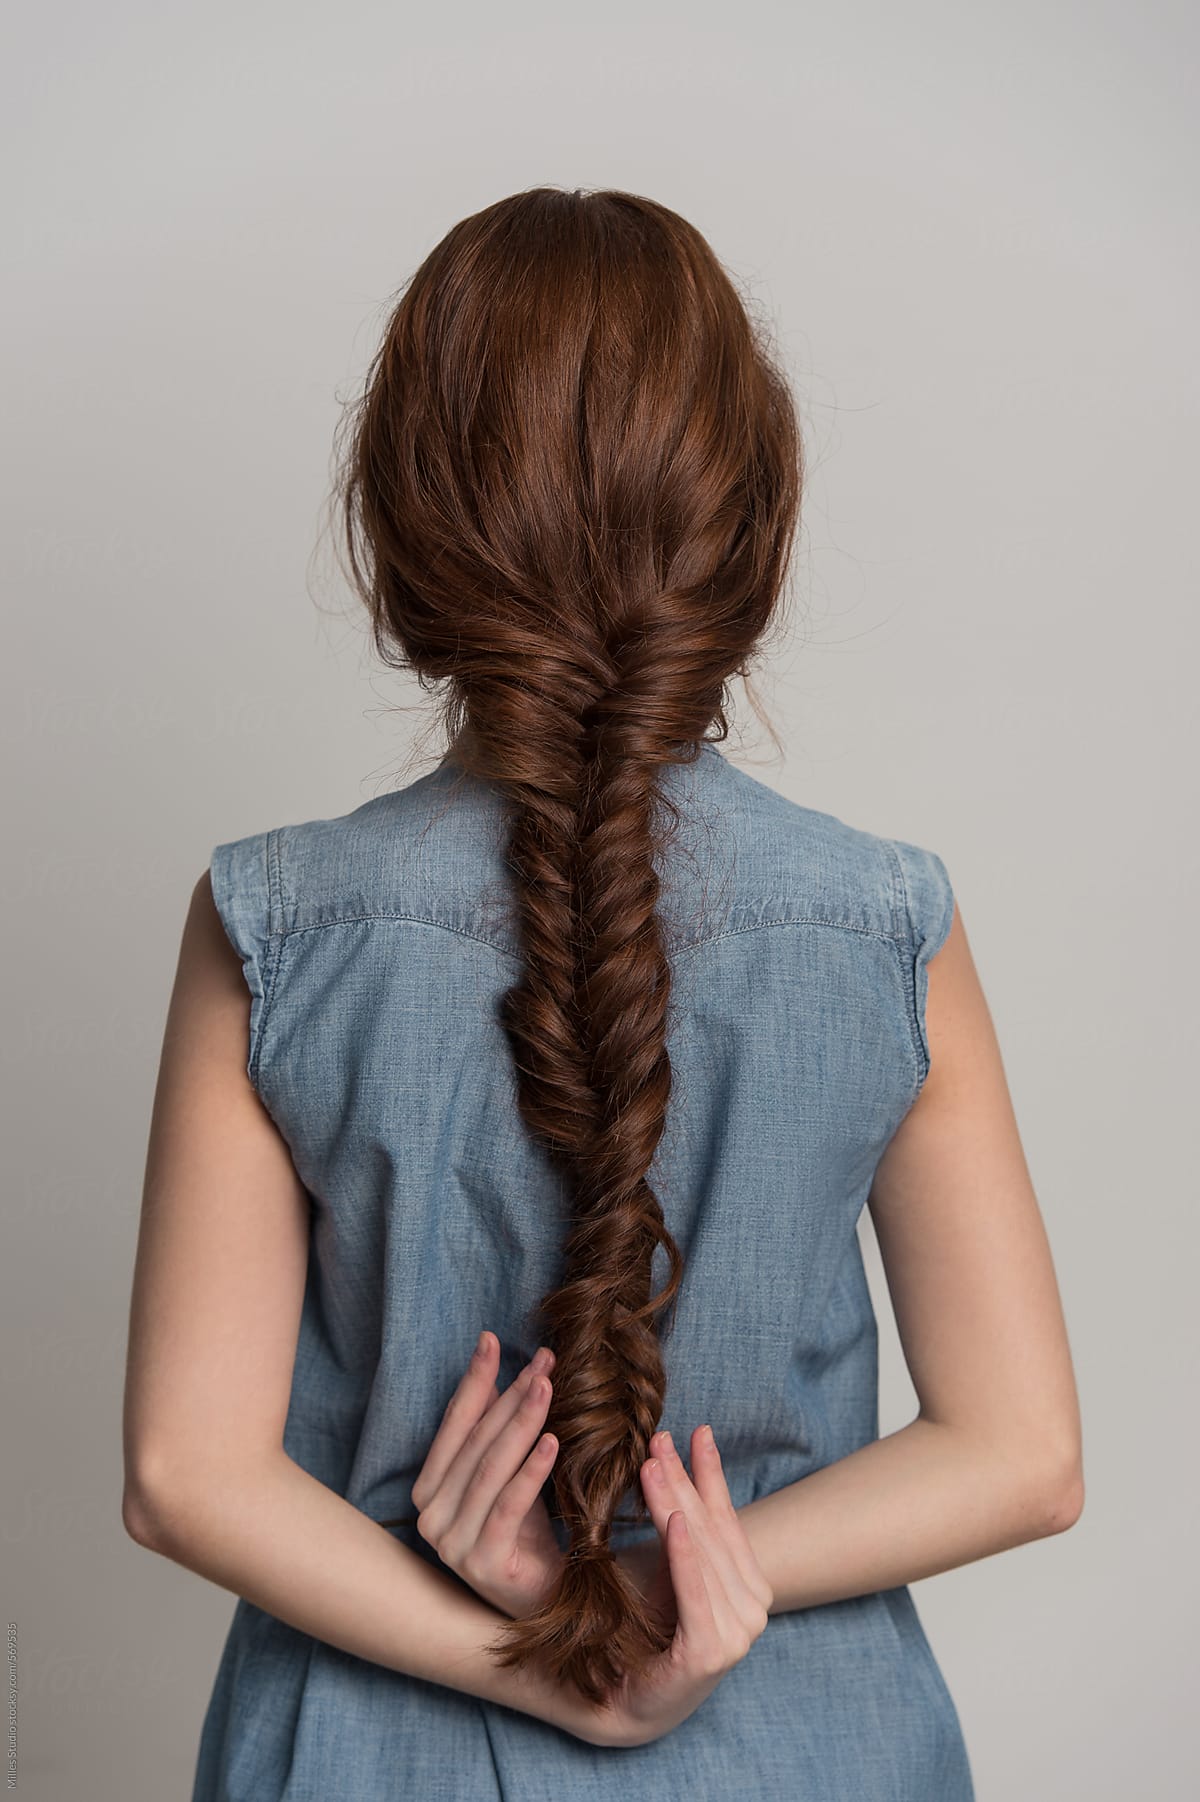 Woman with braid